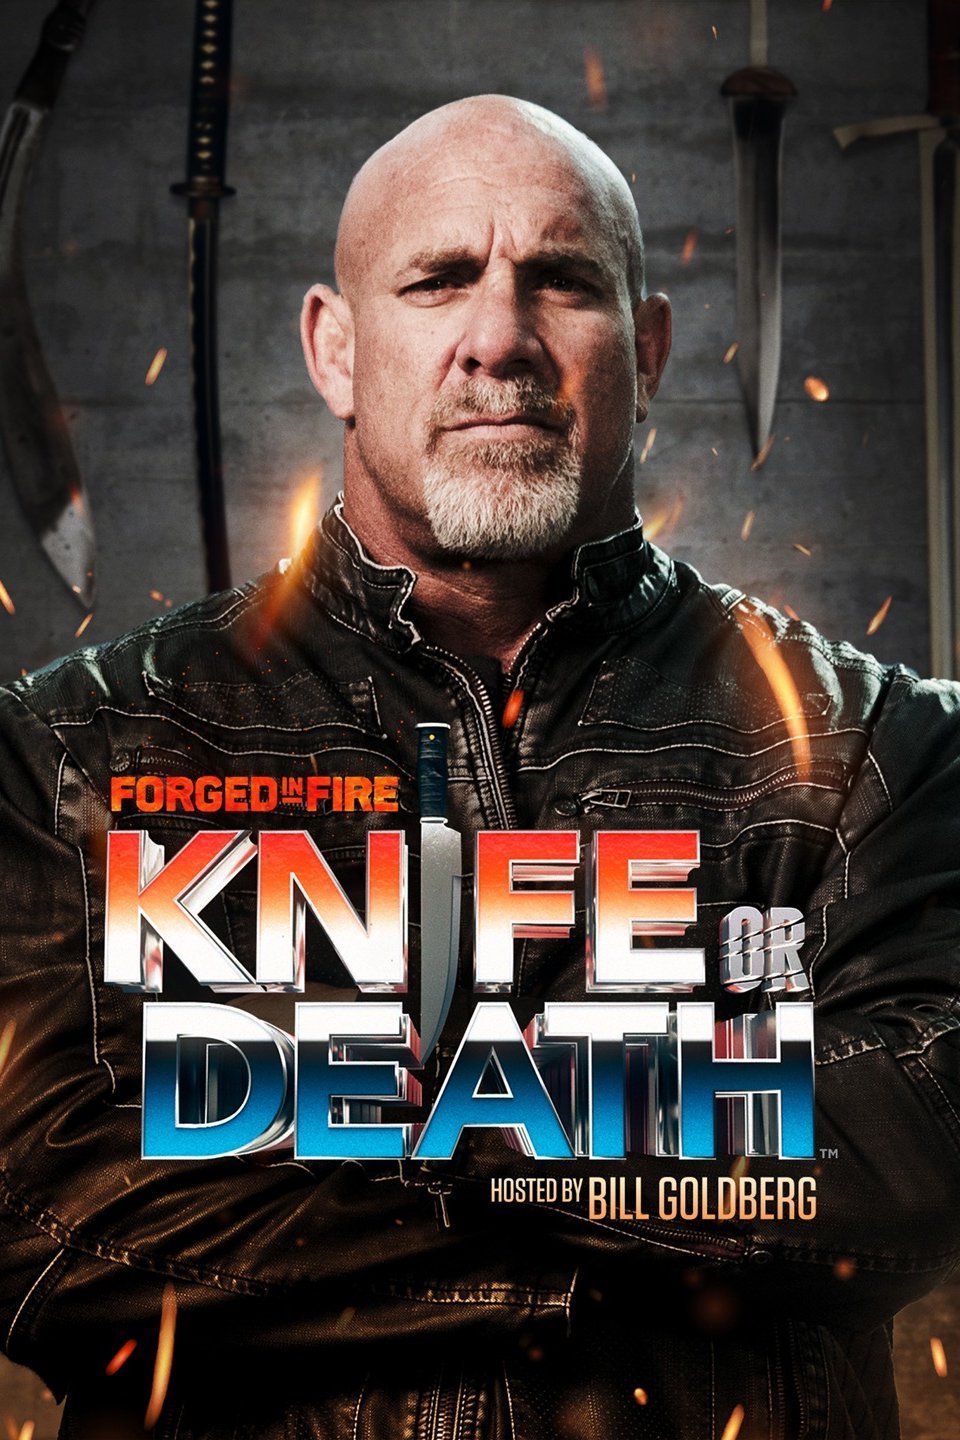 L'affiche du film Forged in Fire: Knife or Death